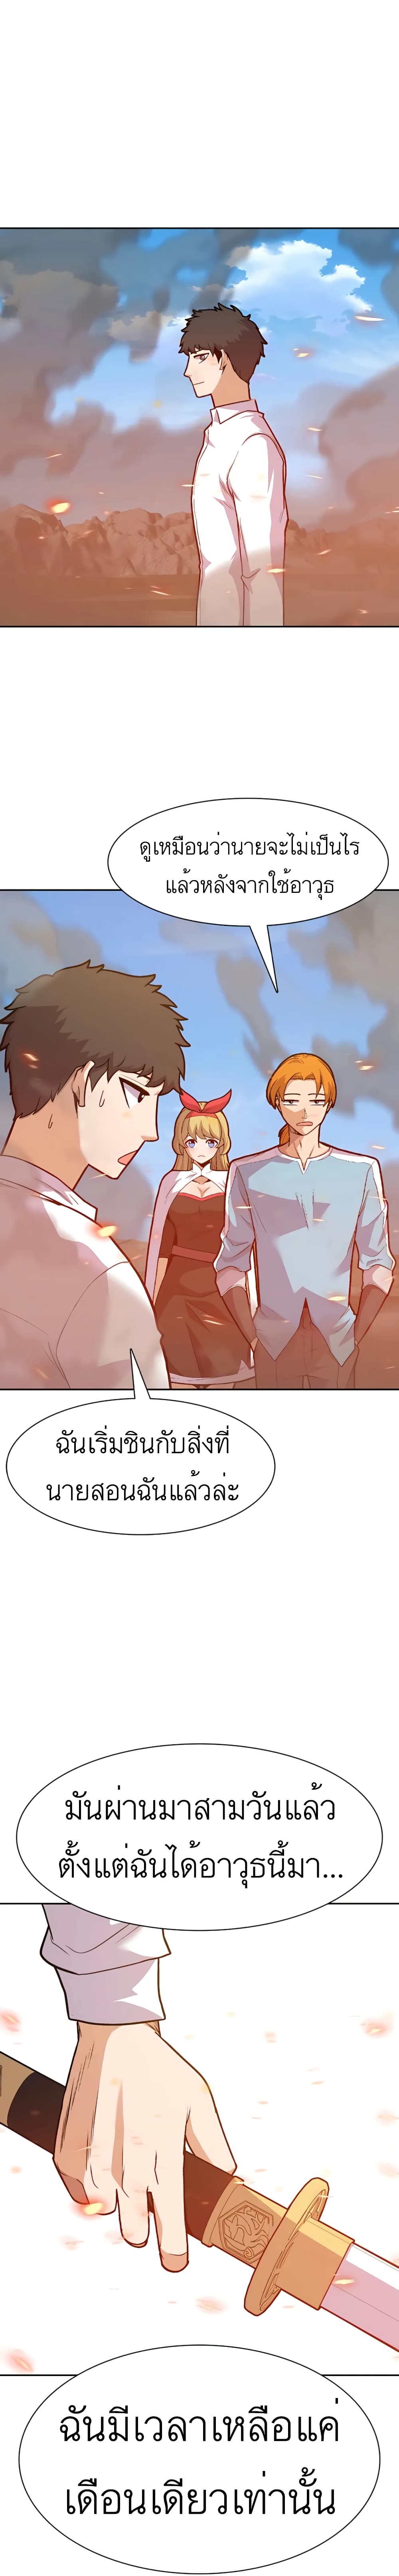 Raising Newbie Heroes In Another World ตอนที่ 23 (11)